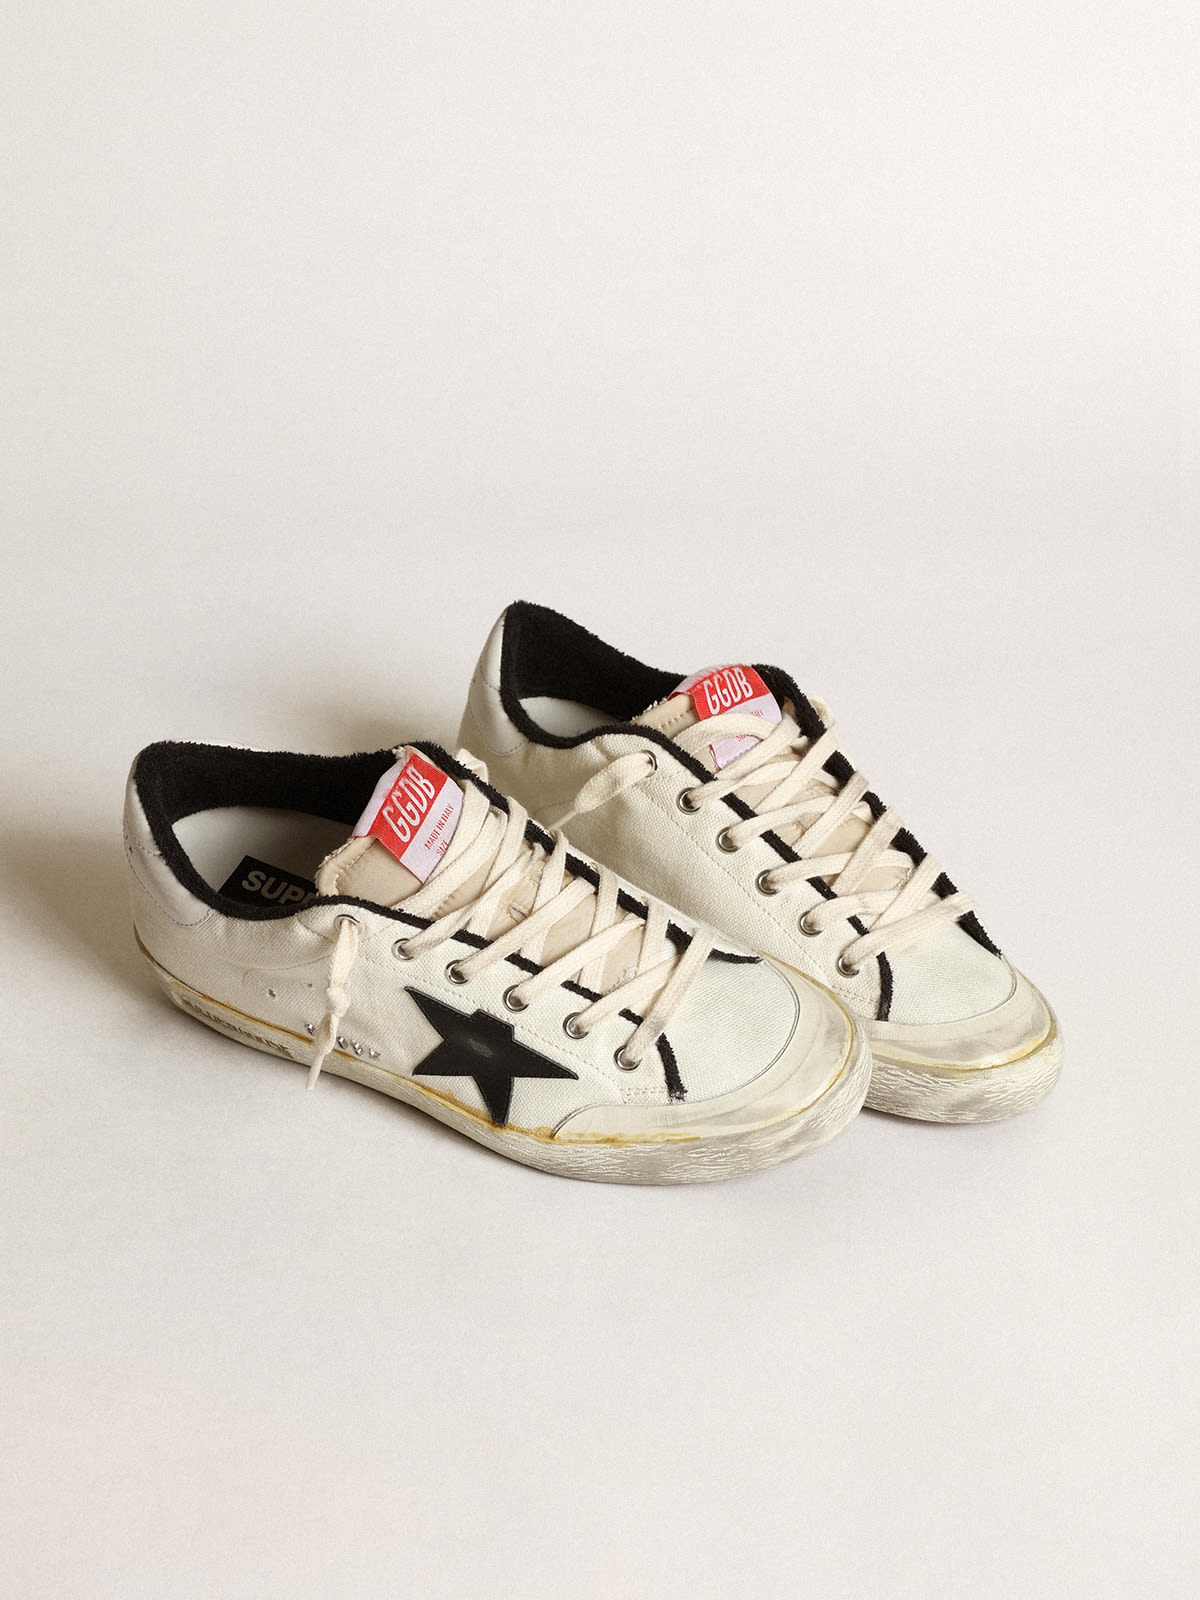 Women’s Super-Star LTD sneakers in beige canvas with black leather star and white leather heel tab - 2